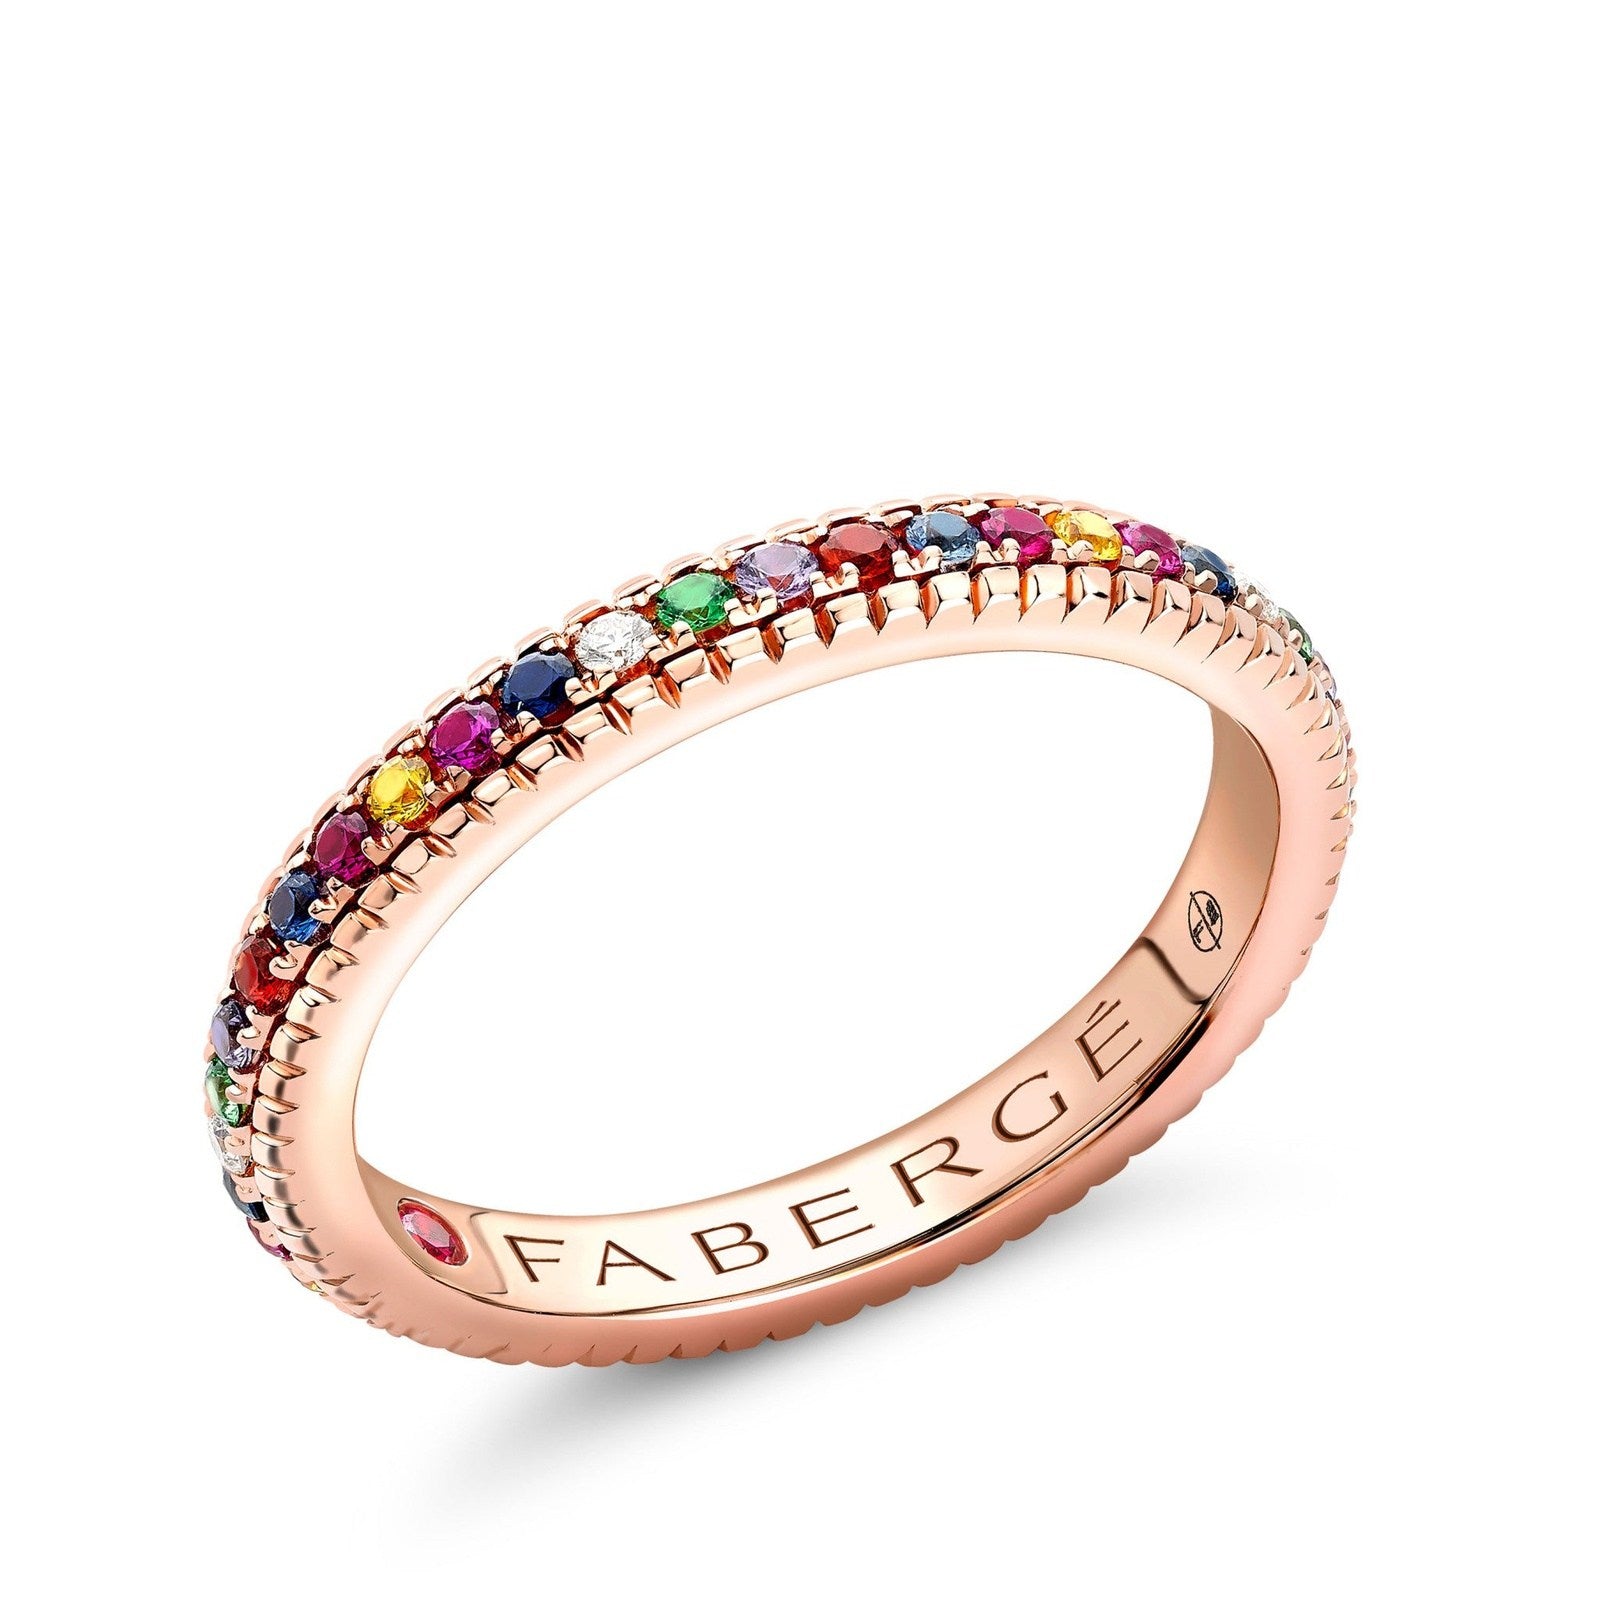 Faberge Colours of Love Rose Gold Multicoloured Gemstone Set Fluted Ring  - 847RG2286